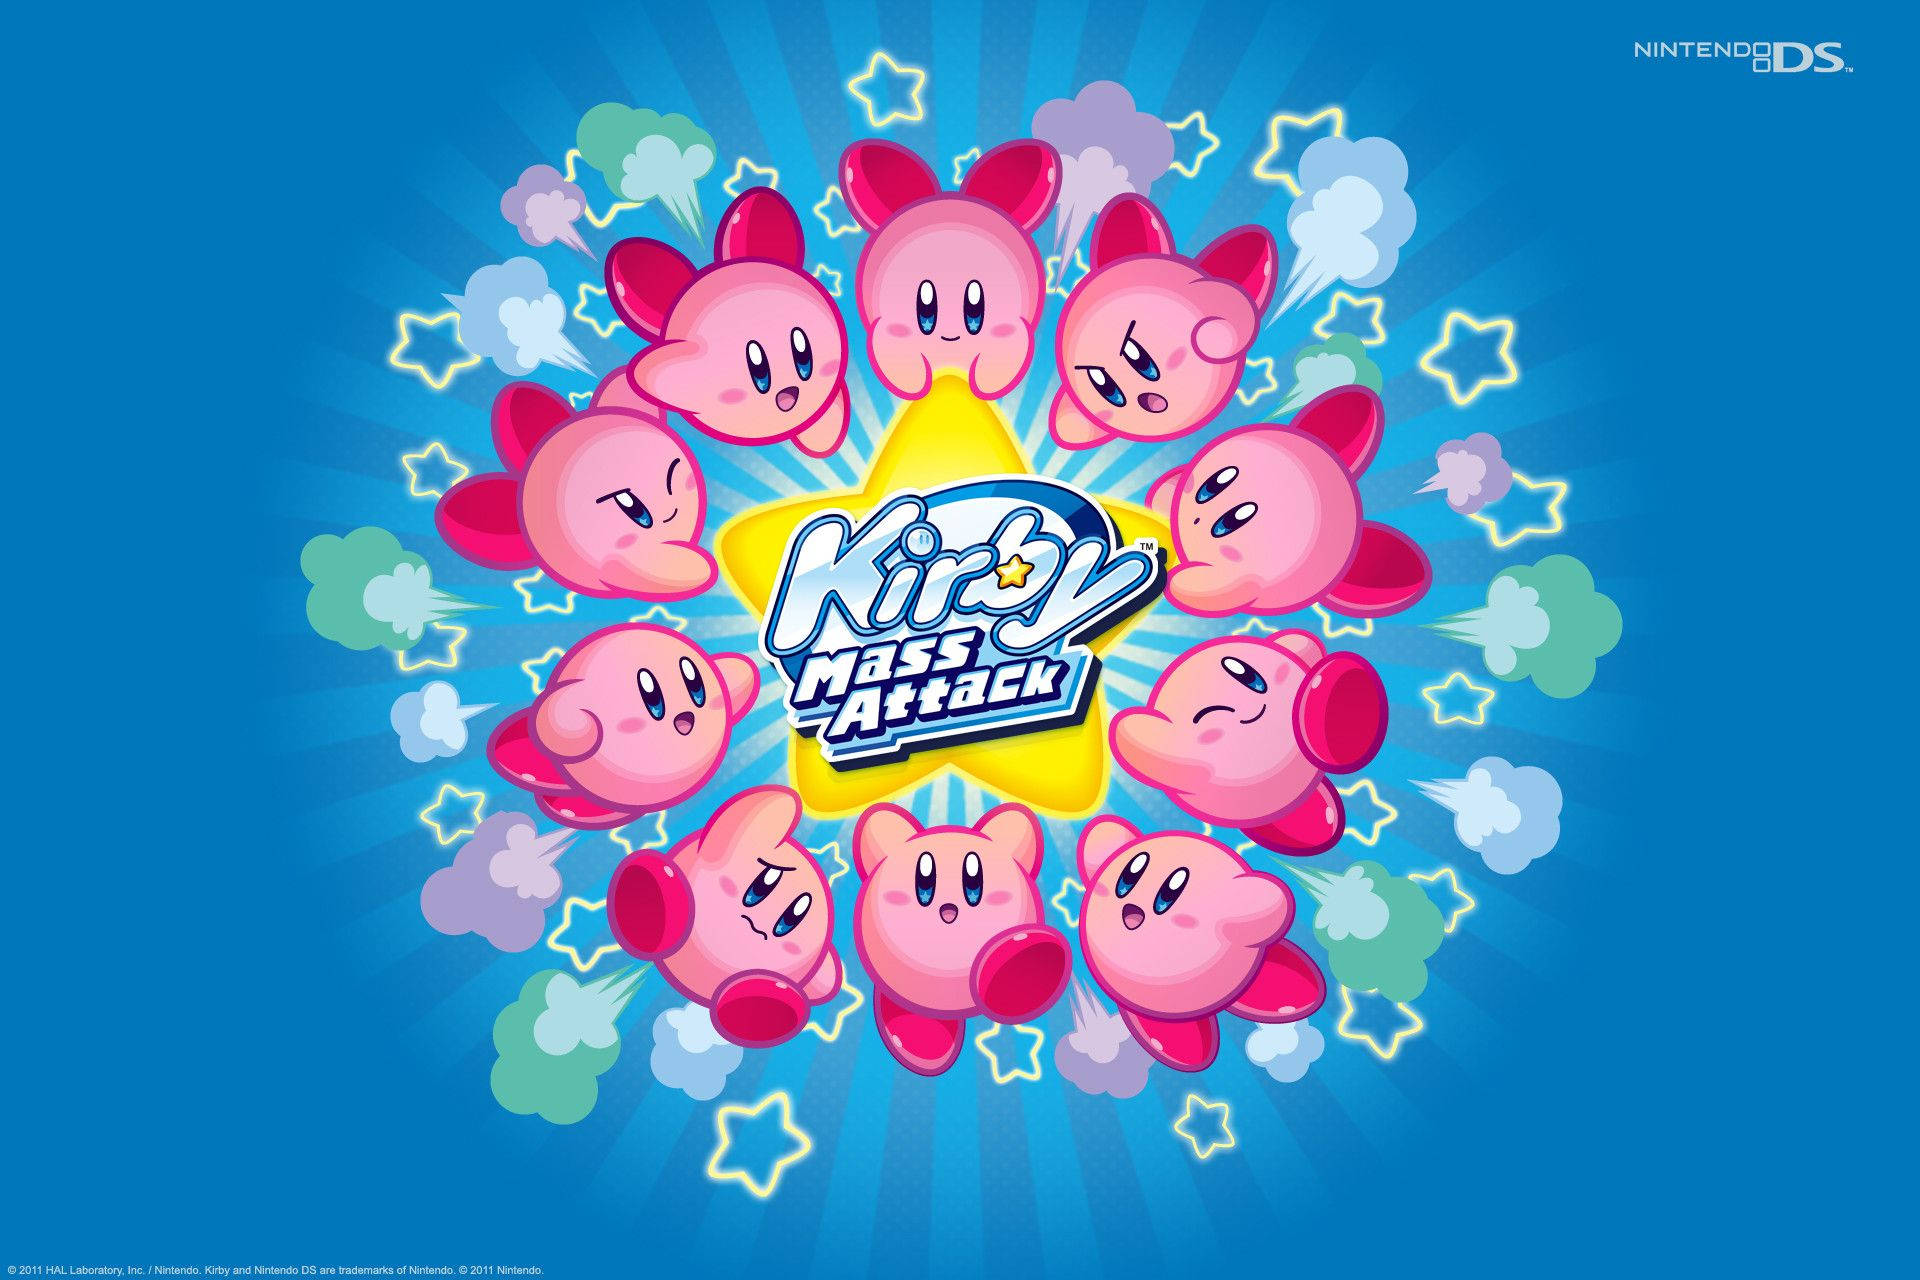 Awesome HD quality wallpaper of Kirby with amazing design background